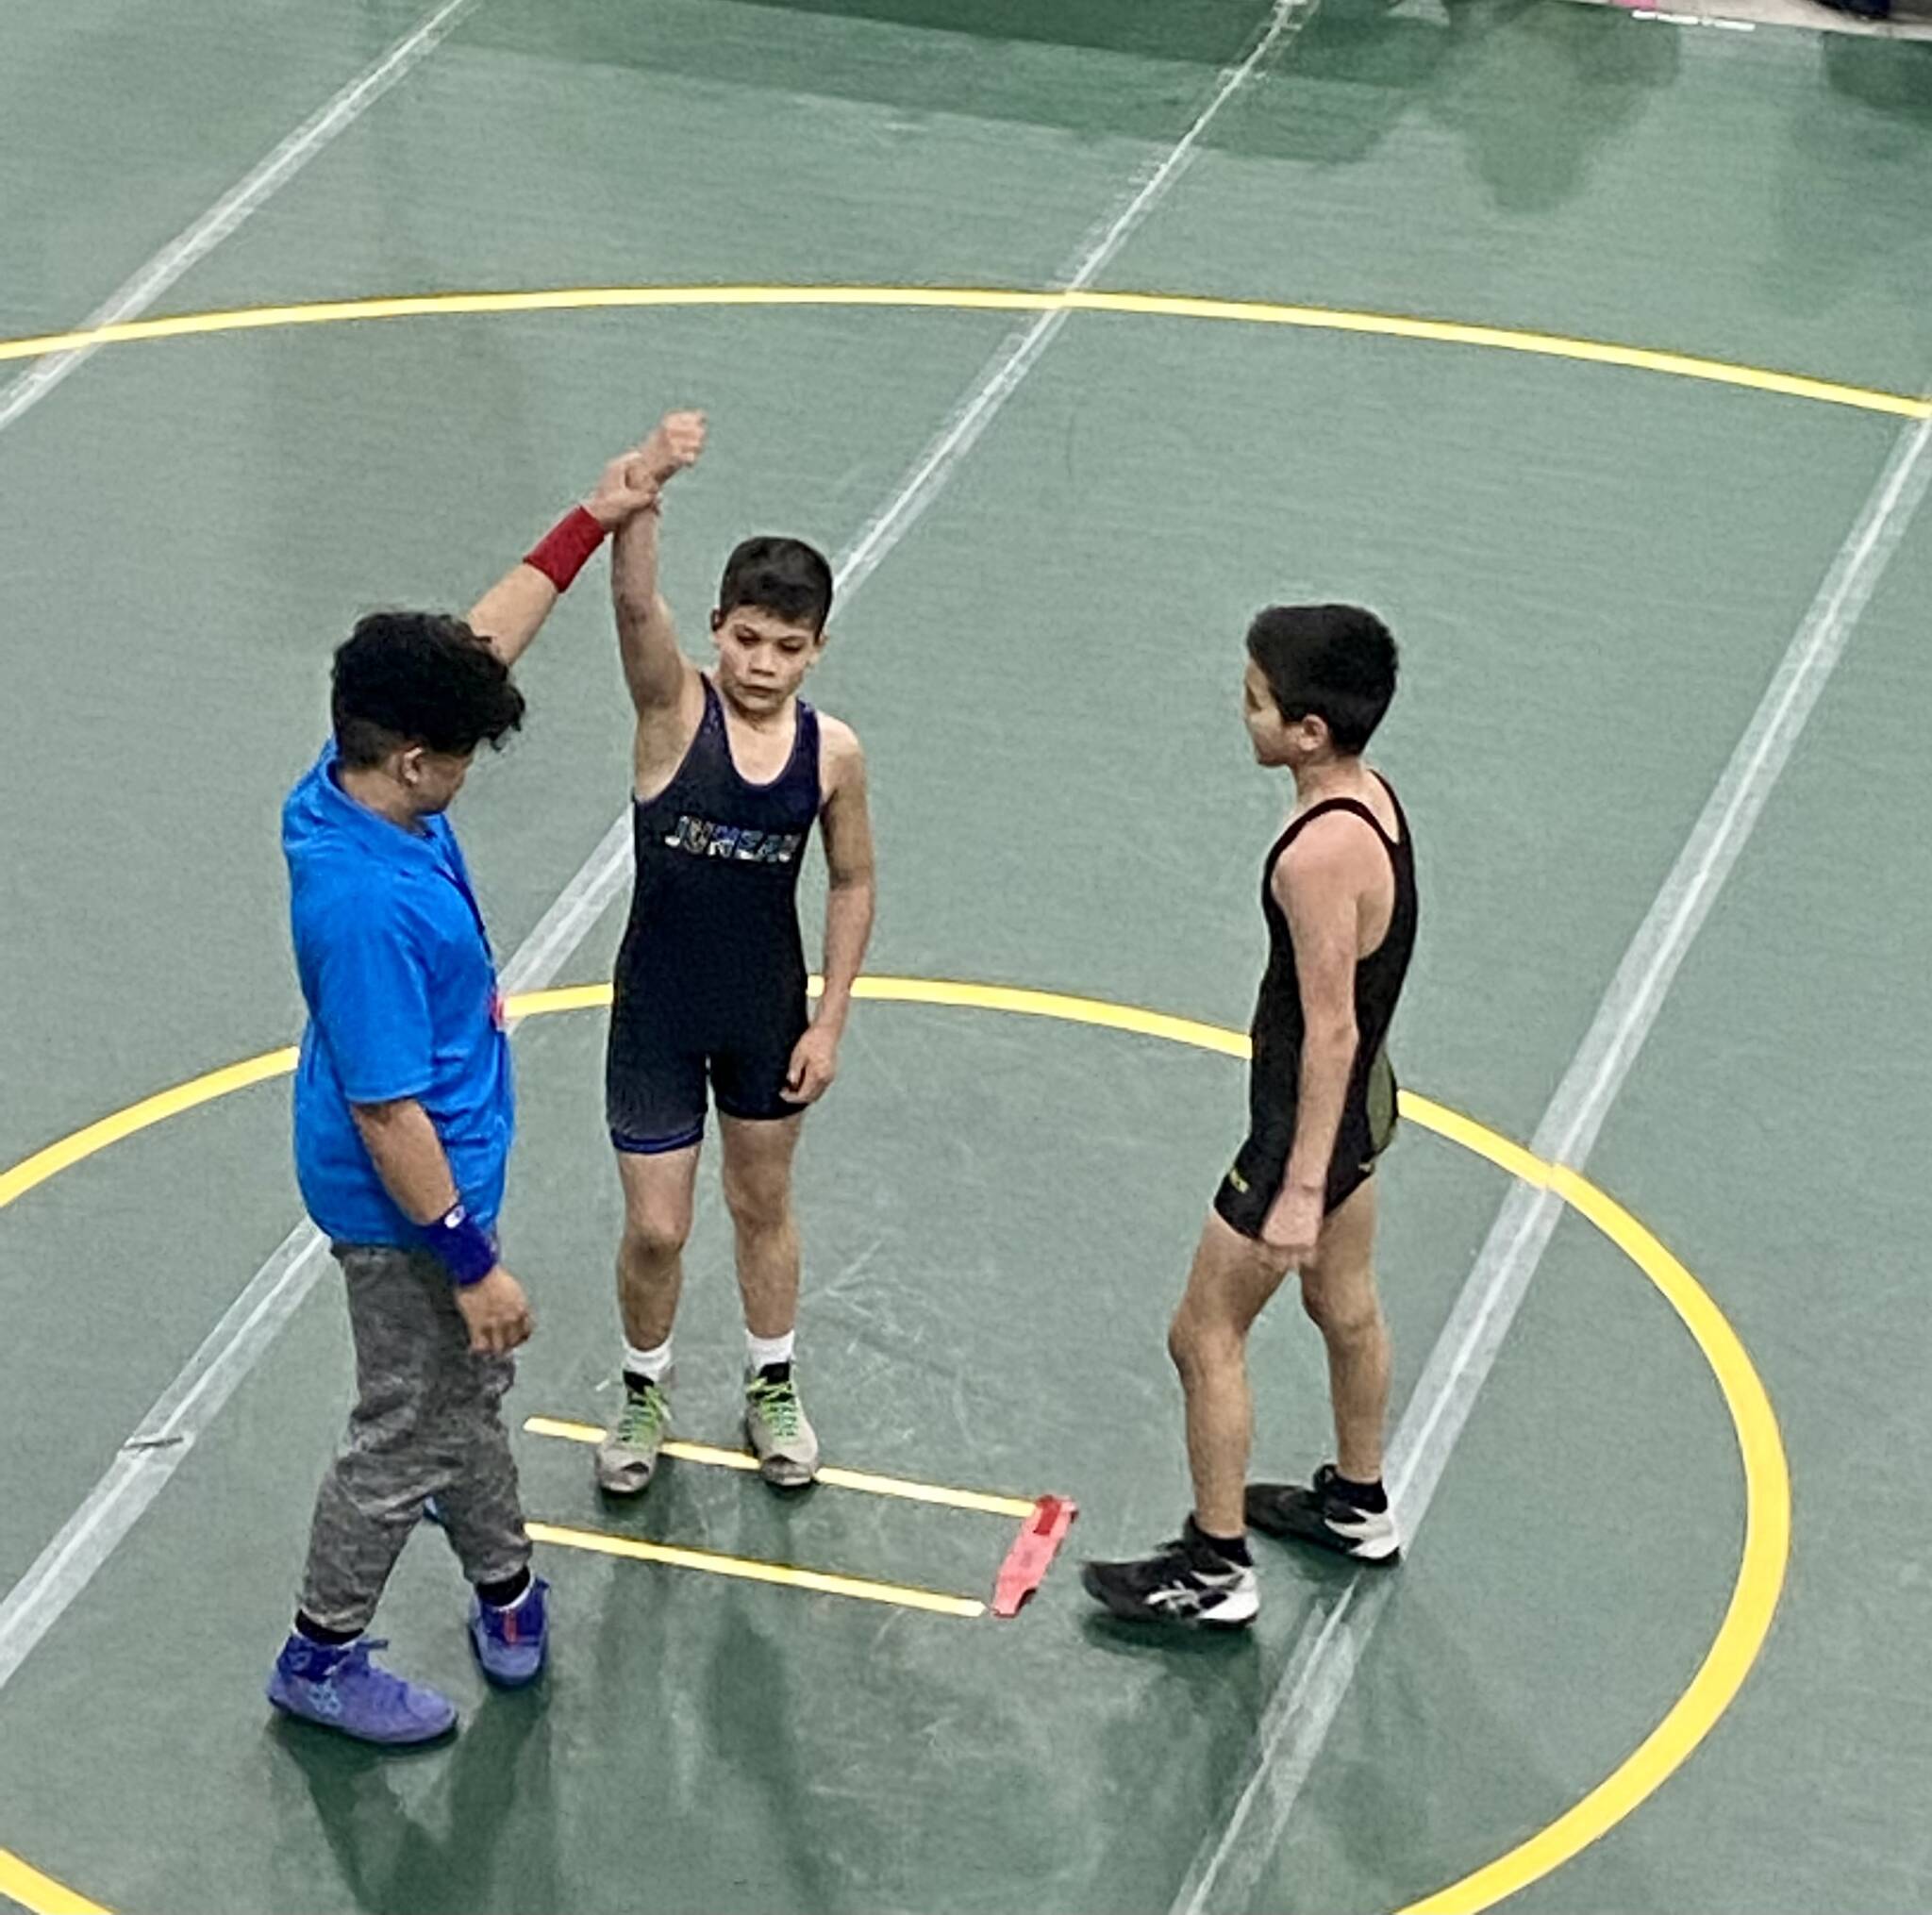 Caleb Aube (JYWC) gets his hand raised in victory over Maxwell Shellabarger (Dillingham Wrestling Club) at the USA Wrestling Alaska State Championships at the Menard Center in Wasilla from May 3-7. (Courtesy Photo / William Dapcevich)